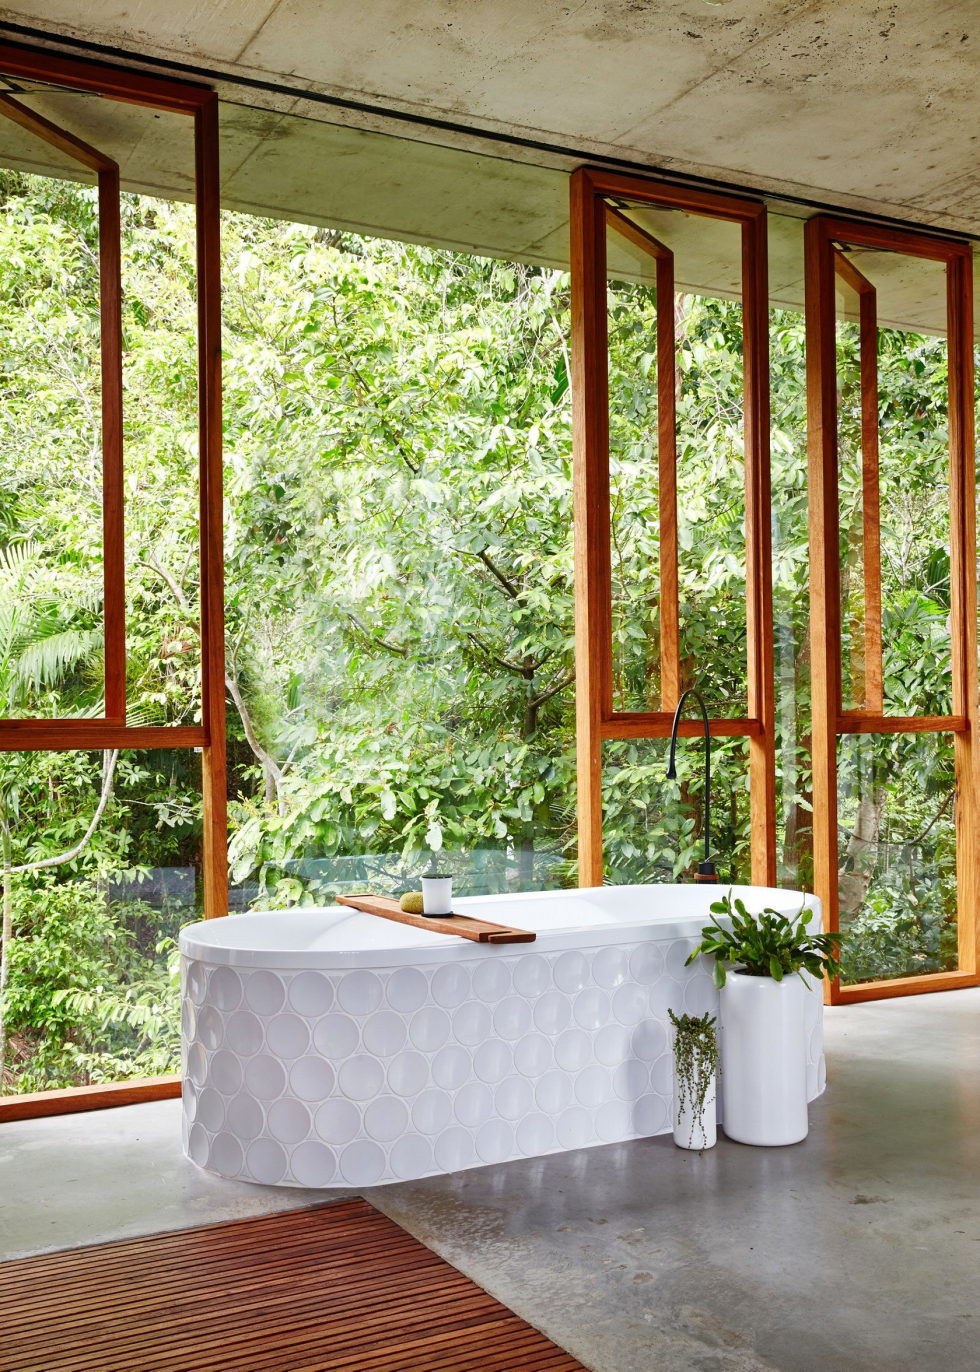 The glass house Planchonella in the tropical forest from Jesse Bennett Architect 23